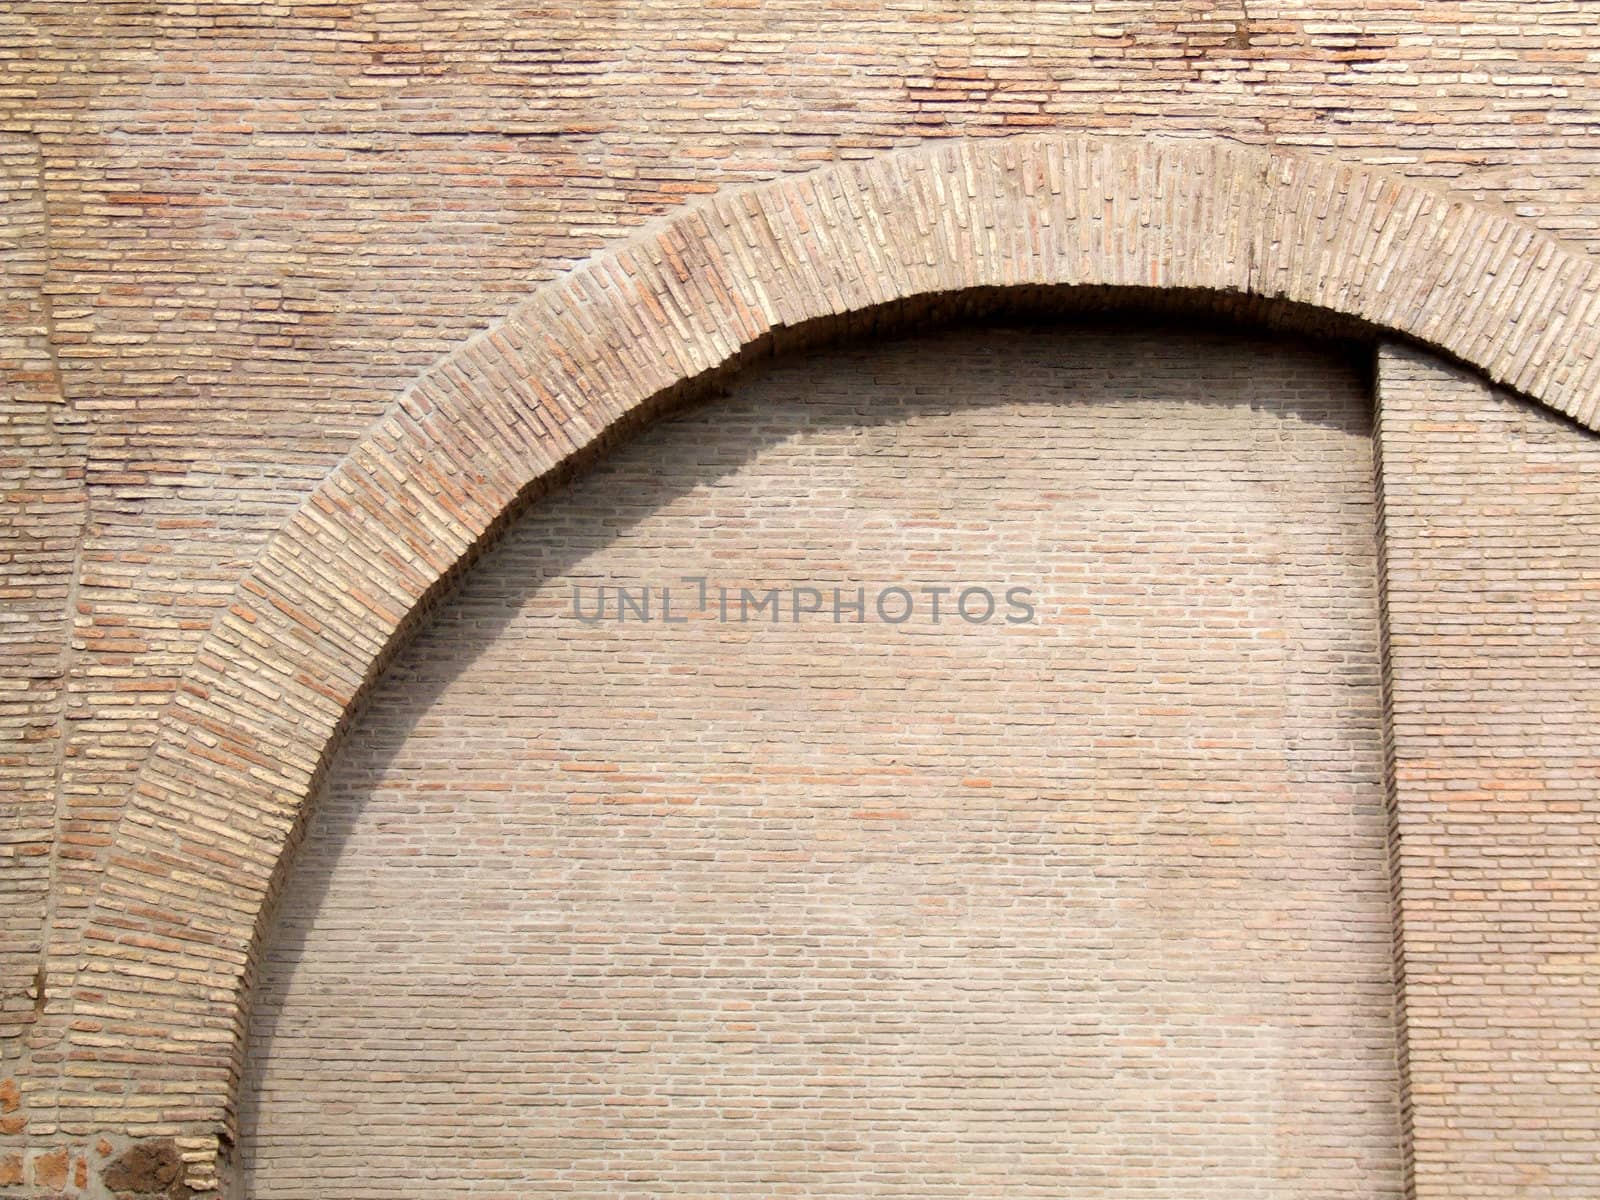 Brick wall and arch in Rome by tupungato